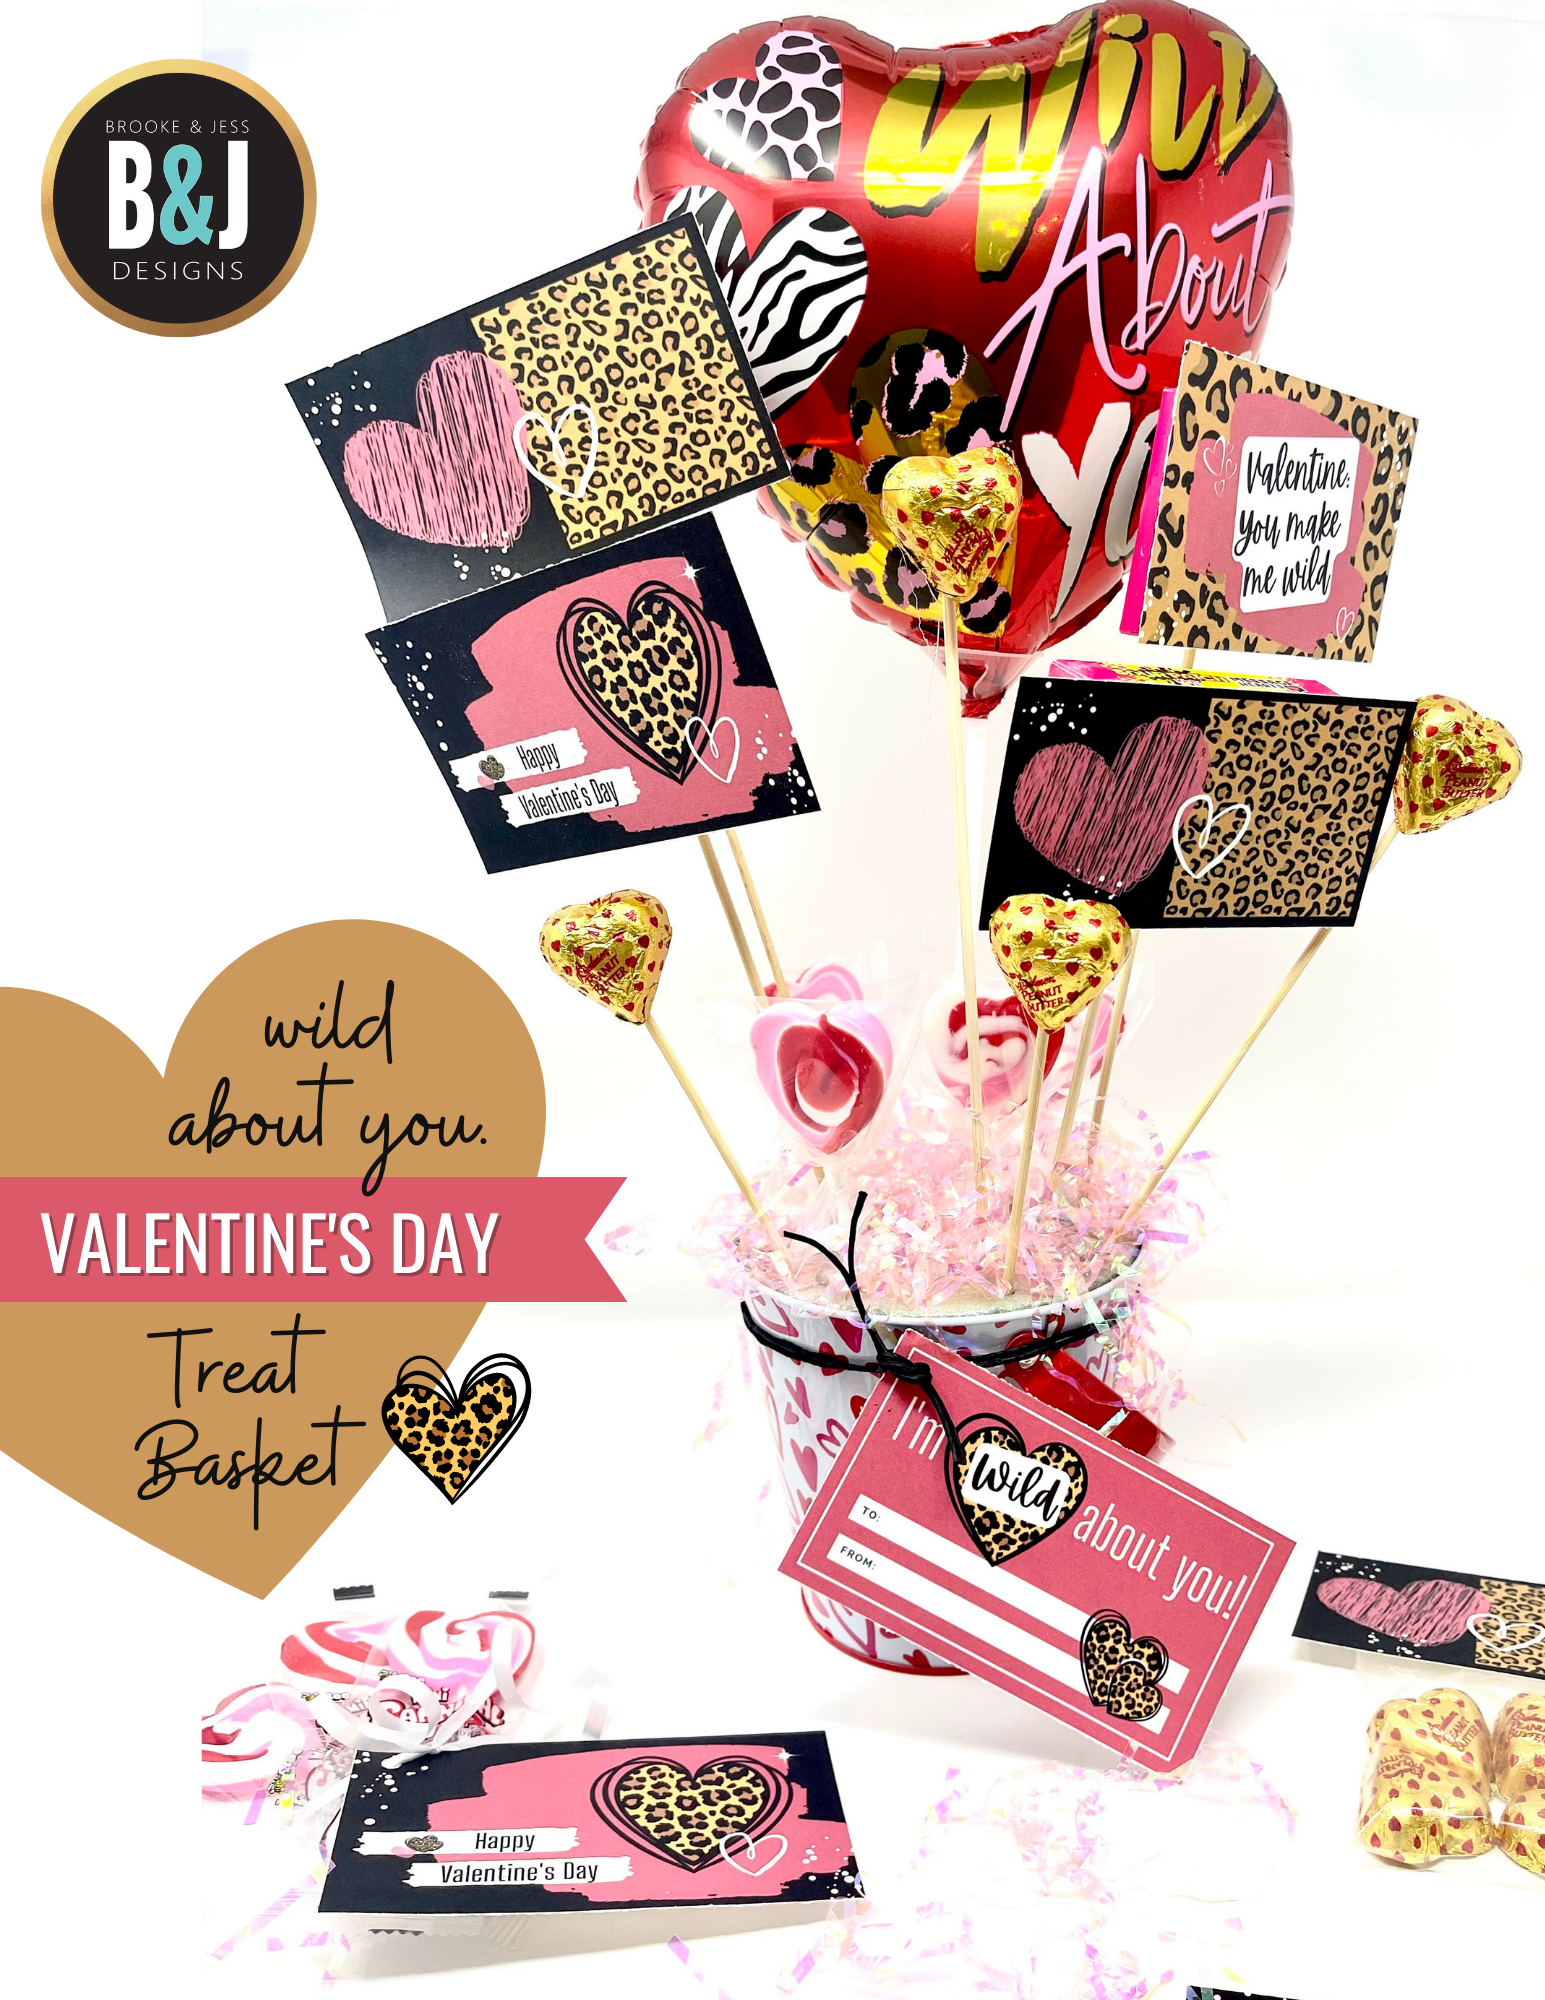 Easy (relatively) DIY Valentine's Bouquet with FREE PRINTABLES